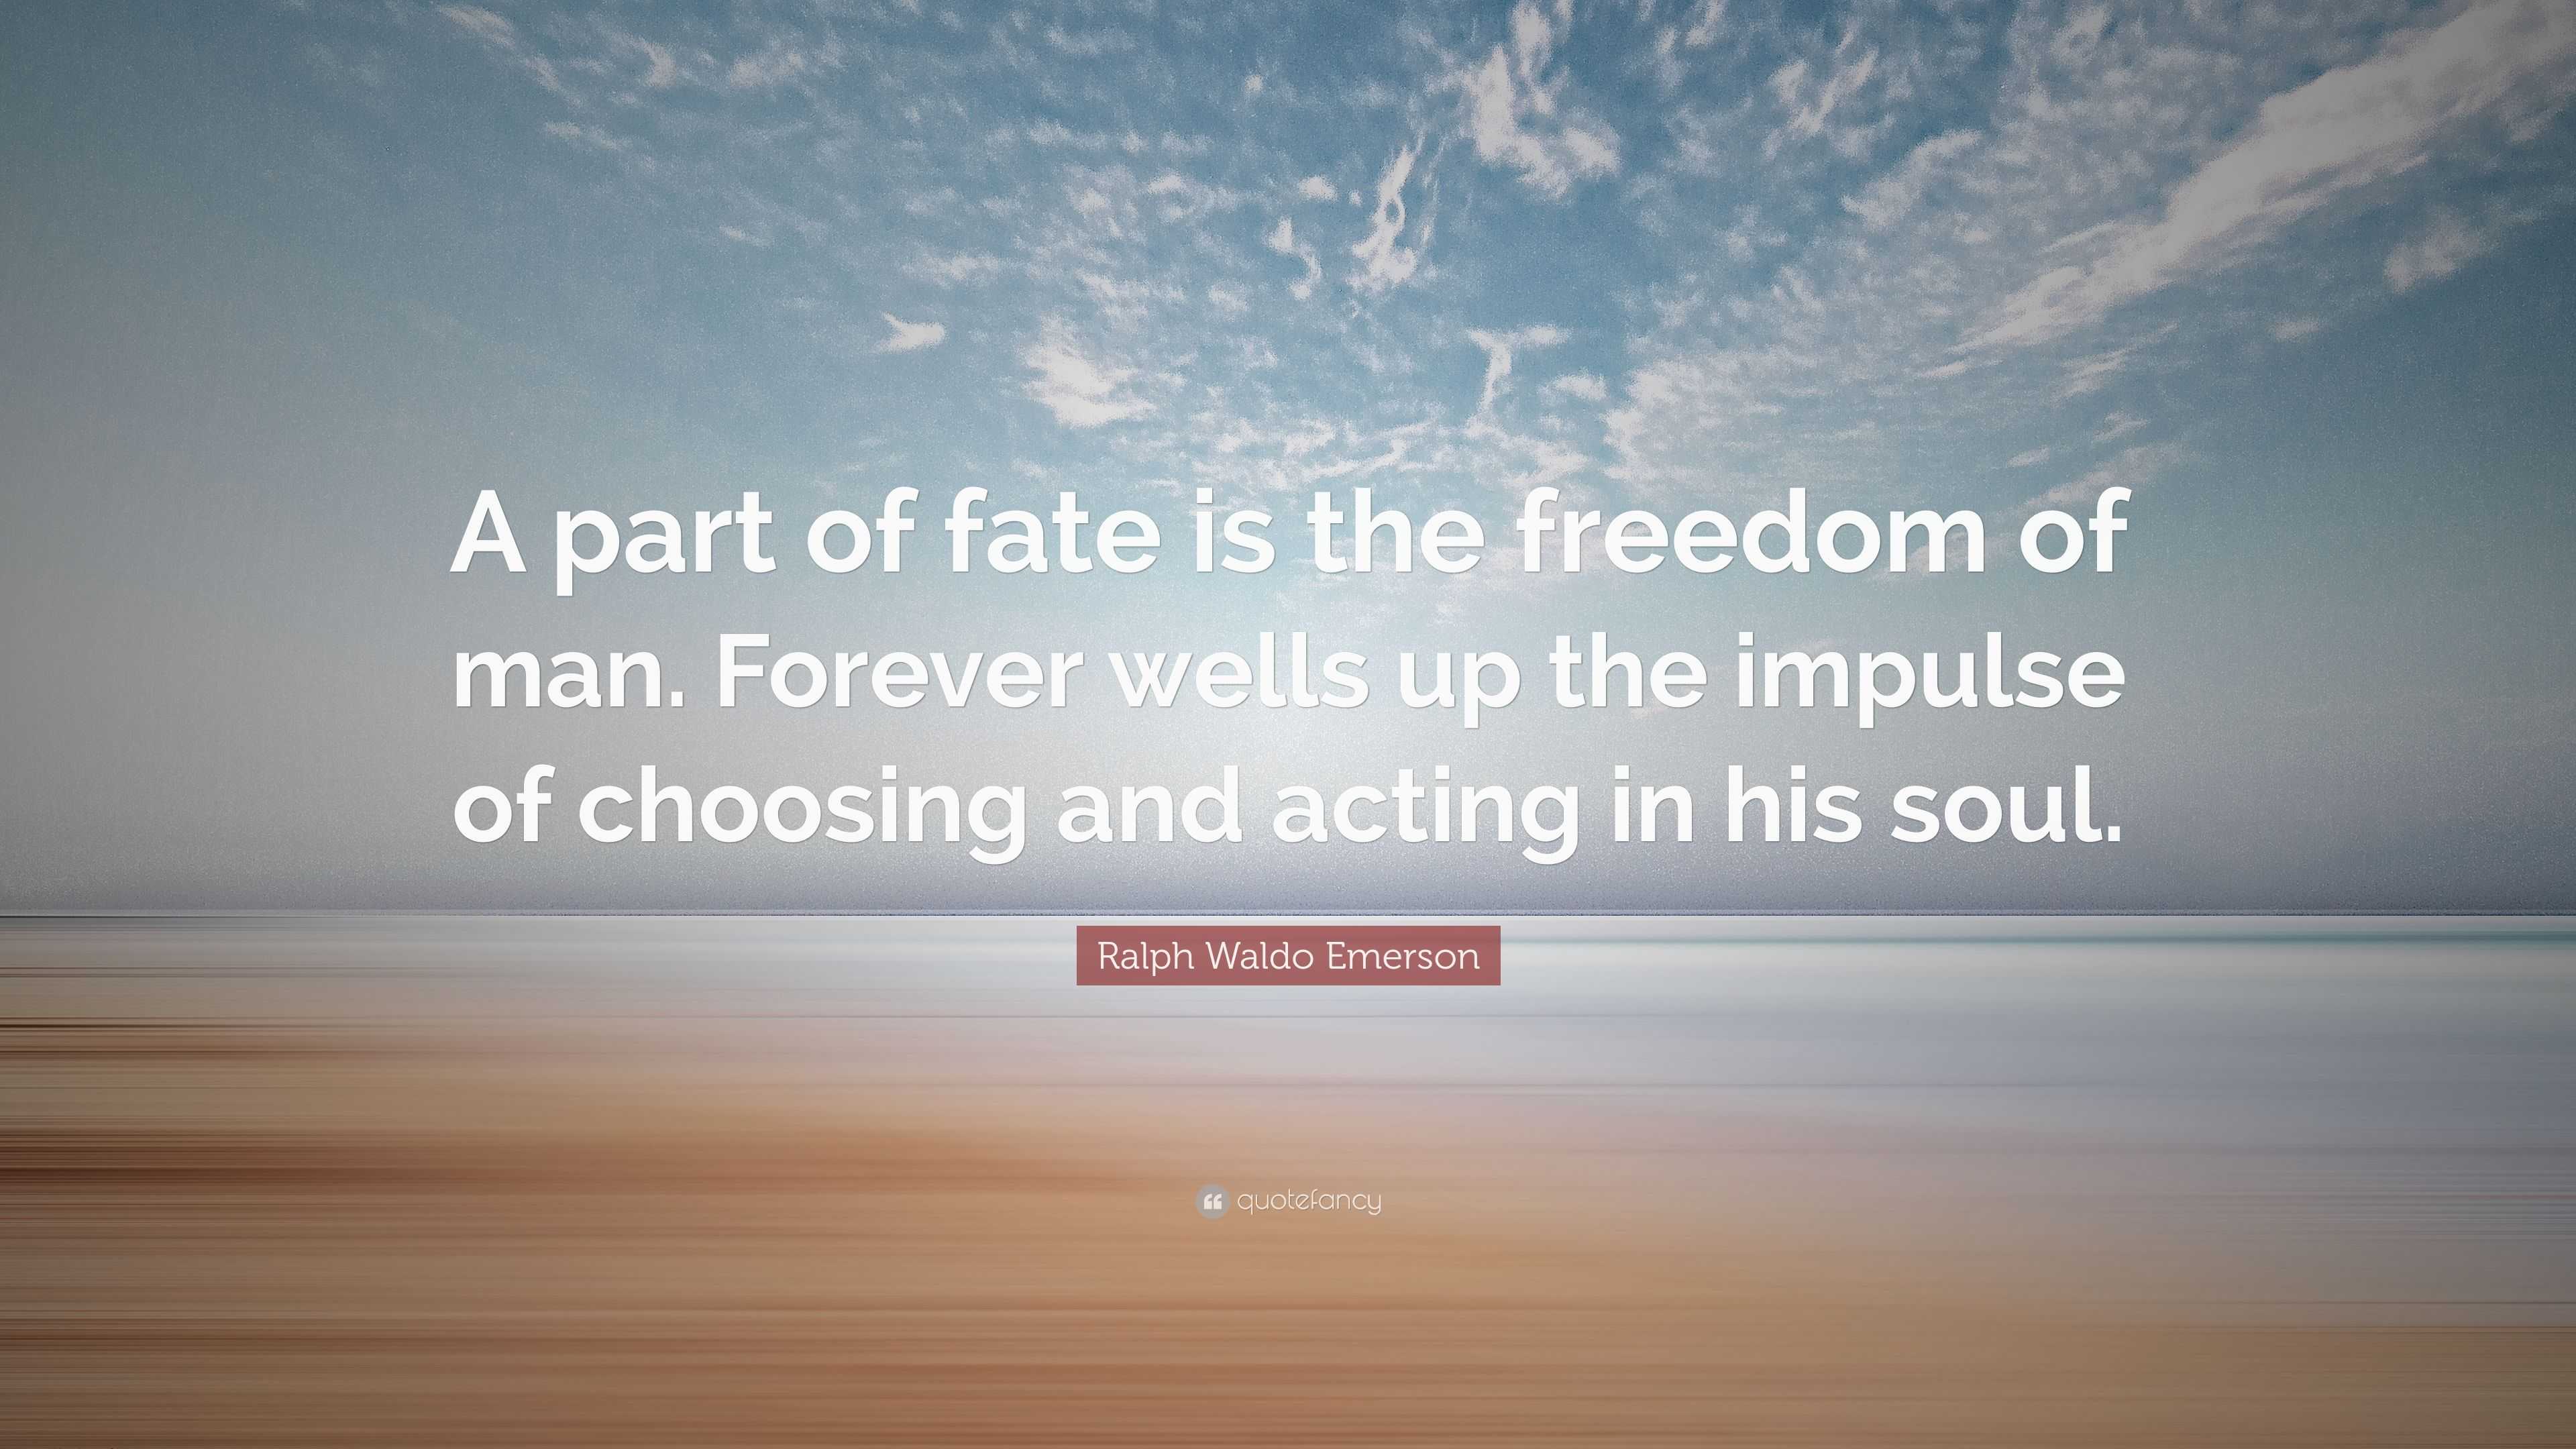 Ralph Waldo Emerson Quote: “A part of fate is the freedom of man. Forever  wells up